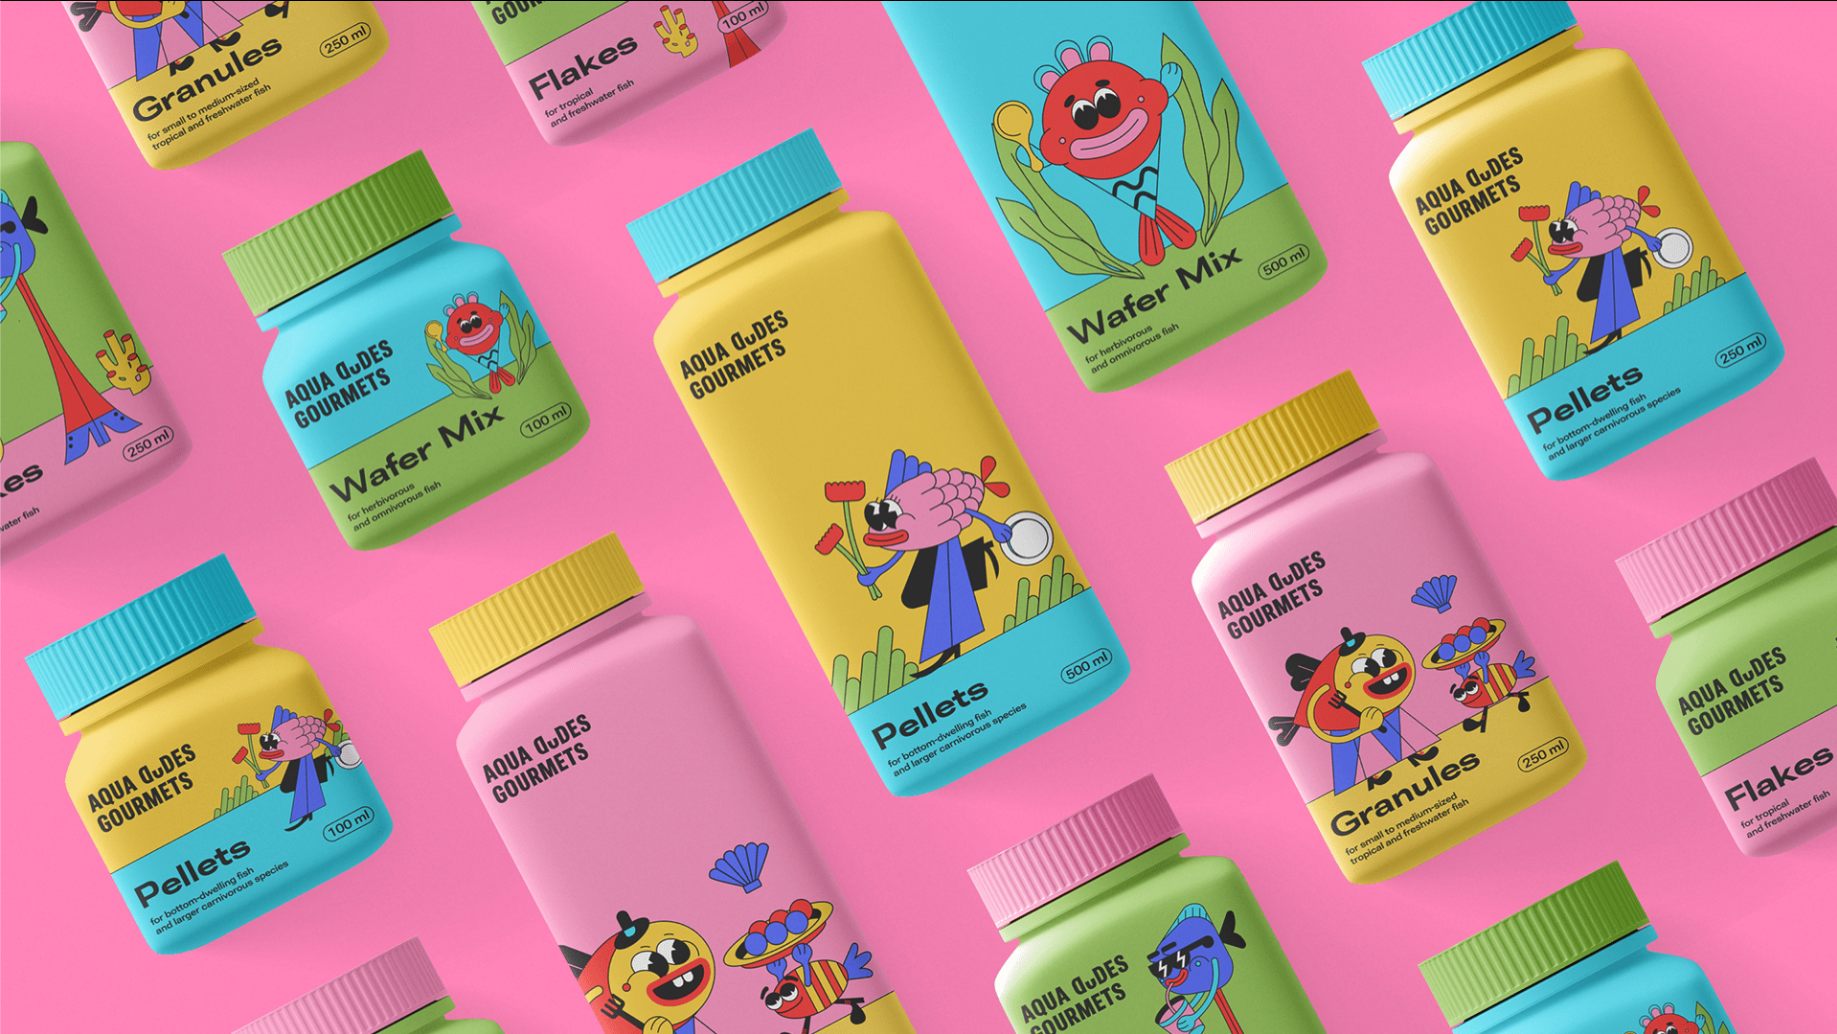 fresh packaging design trends featuring quirky characters